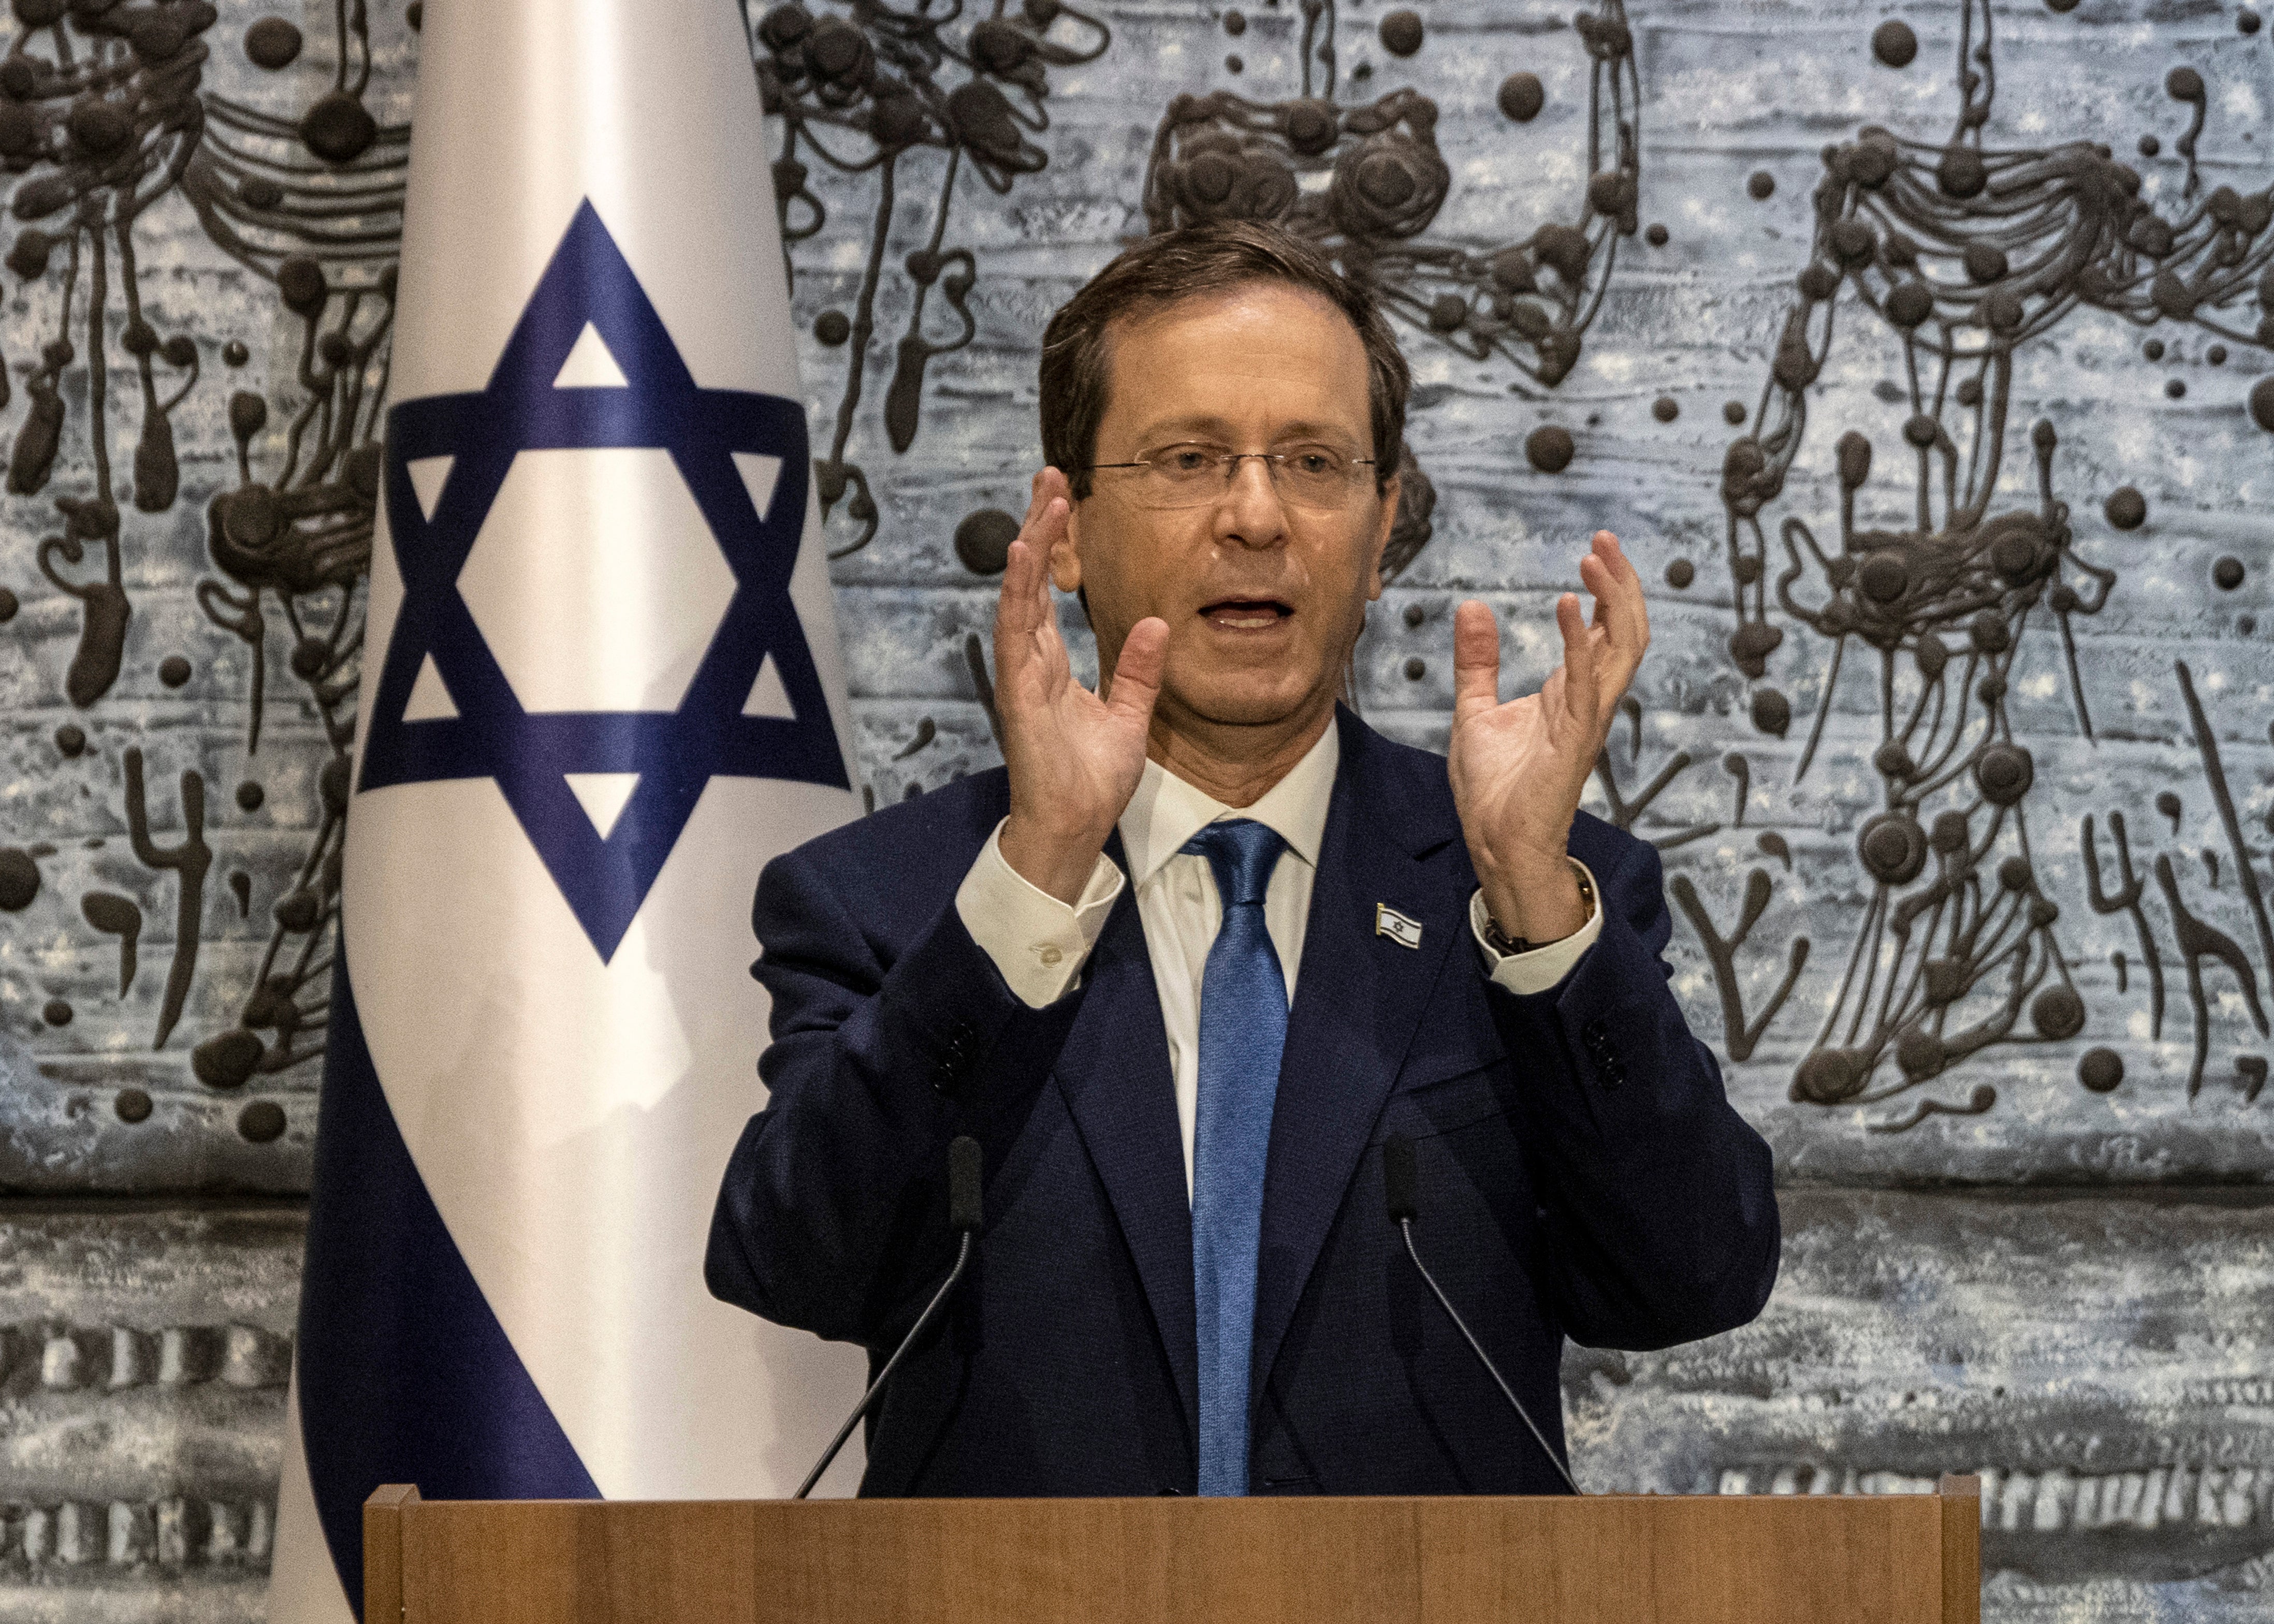 President Isaac Herzog has been reinforcing Israeli diplomacy aimed at improving ties with Ankara, where there has been censure of Israel‘s policies toward the Palestinians